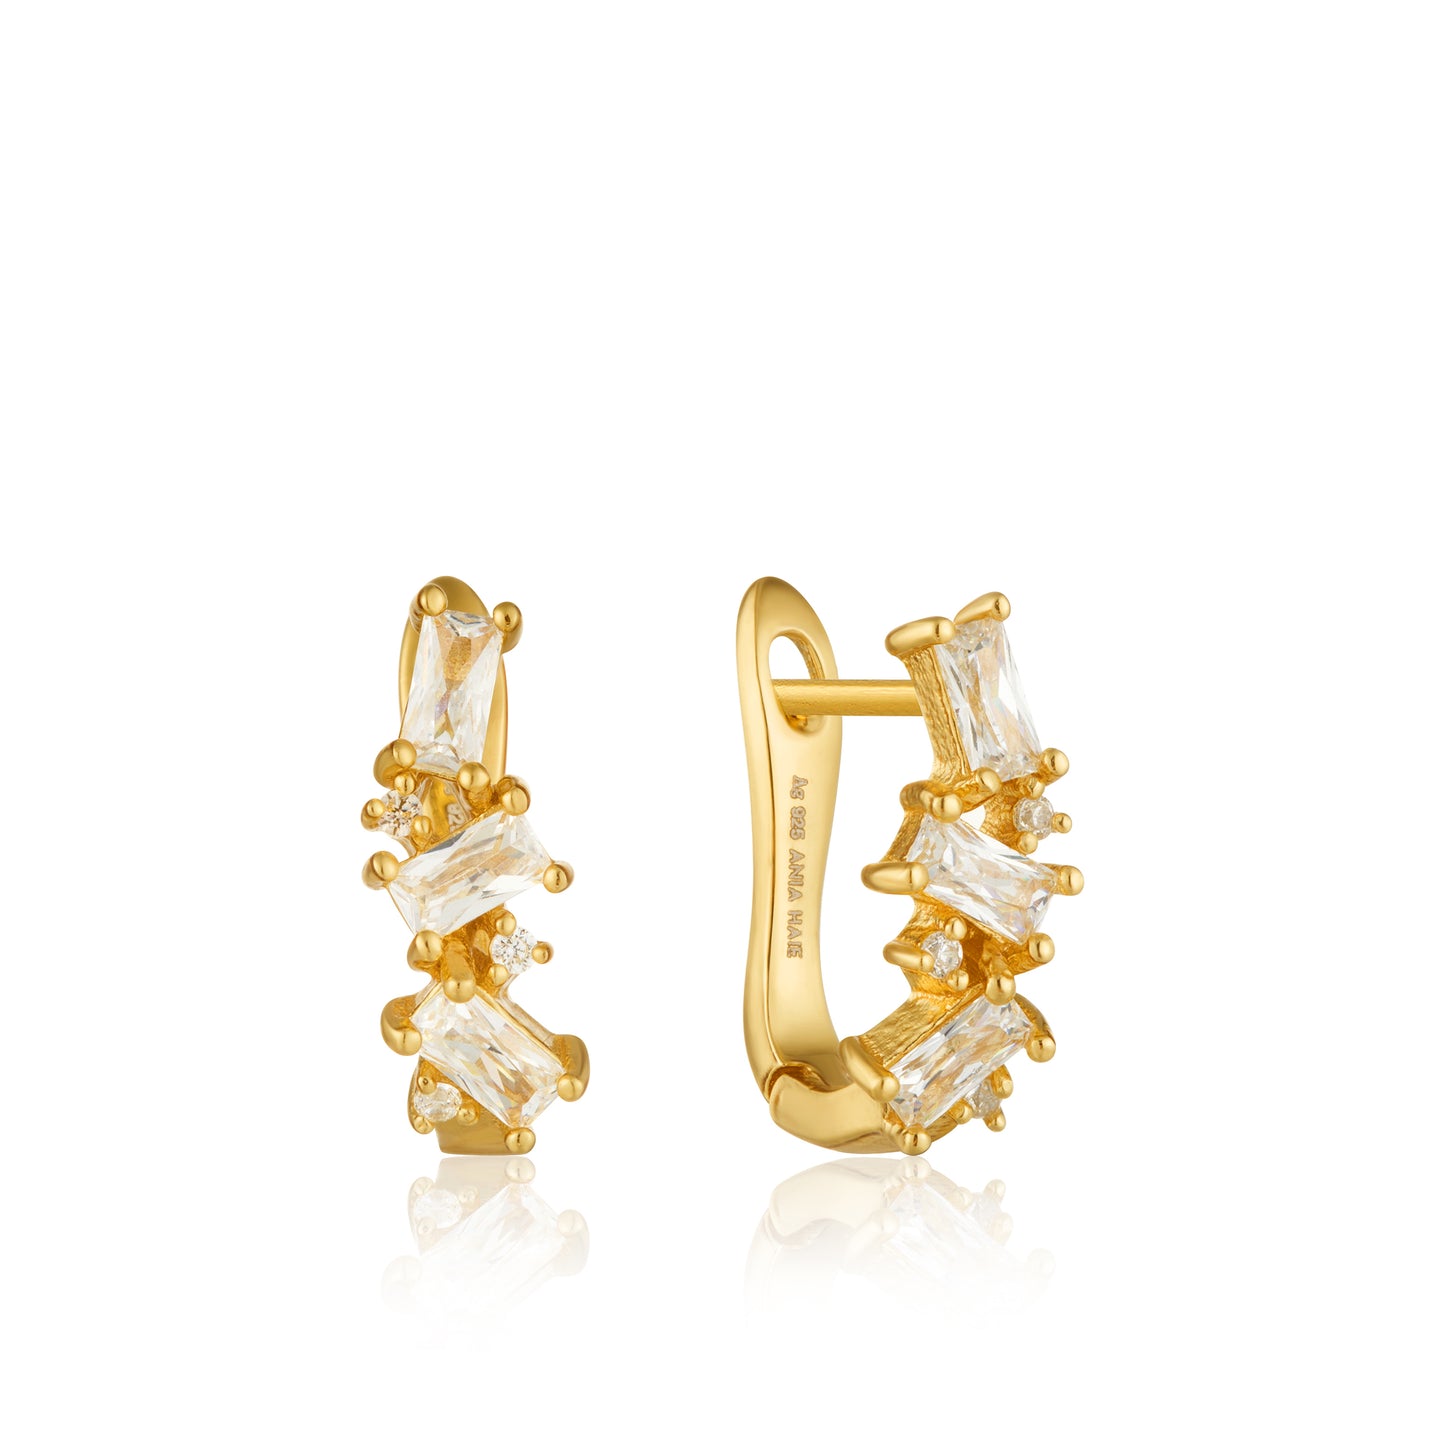 ANIA HAIE ANIA HAIE - Gold Cluster Huggie Earrings available at The Good Life Boutique